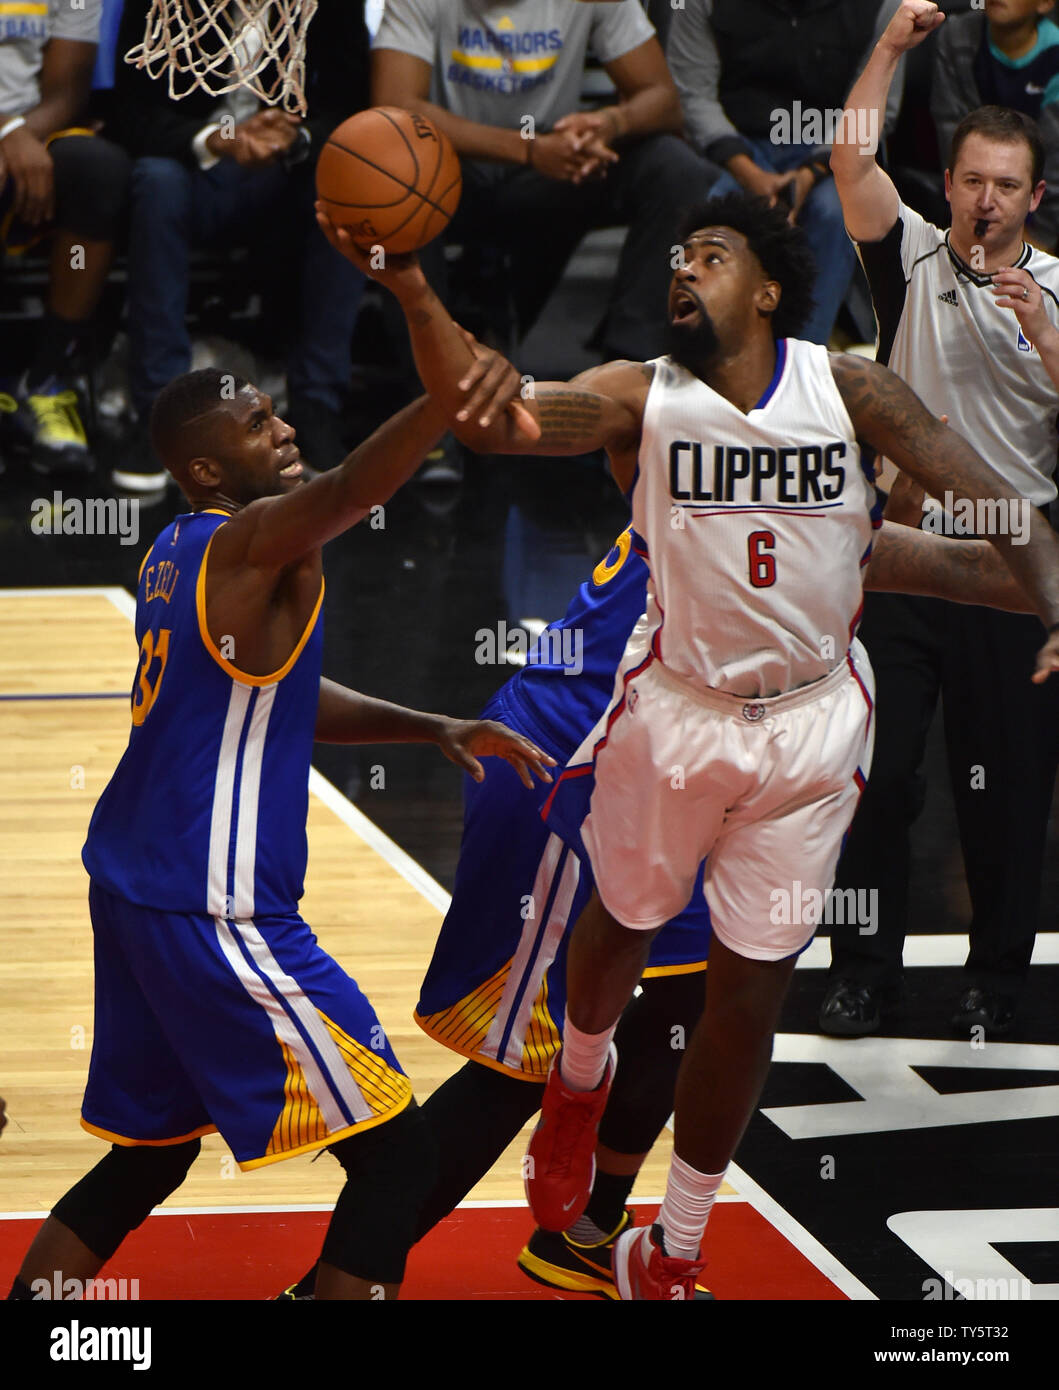 Clippers DeAndre Jordan is hit by Warriors Festus Ezeli in the second half  at Staples Center